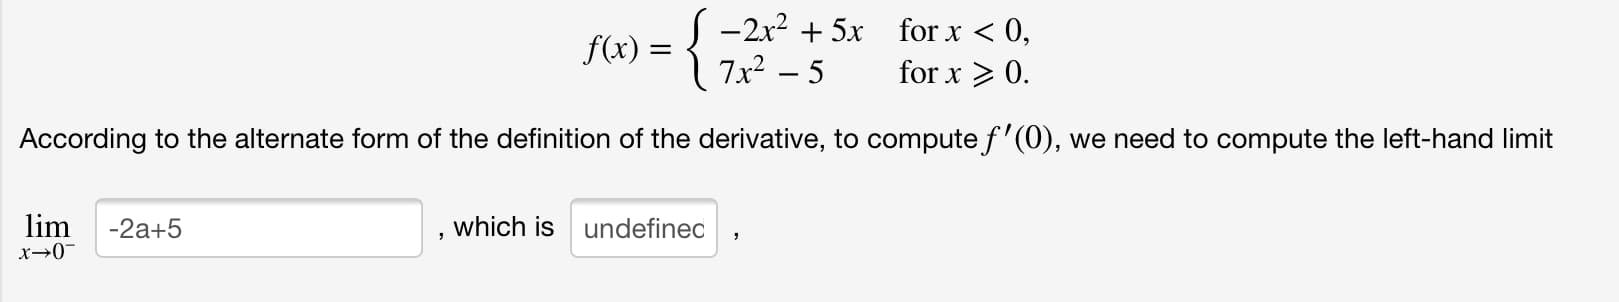 S -2x? + 5x
7x² – 5
for x < 0,
f(x) =
for x > 0.
According to the alternate form of the definition of the derivative, to compute f'(0), we need to compute the left-hand limit
lim
which is undefined
-2a+5
x→0"
